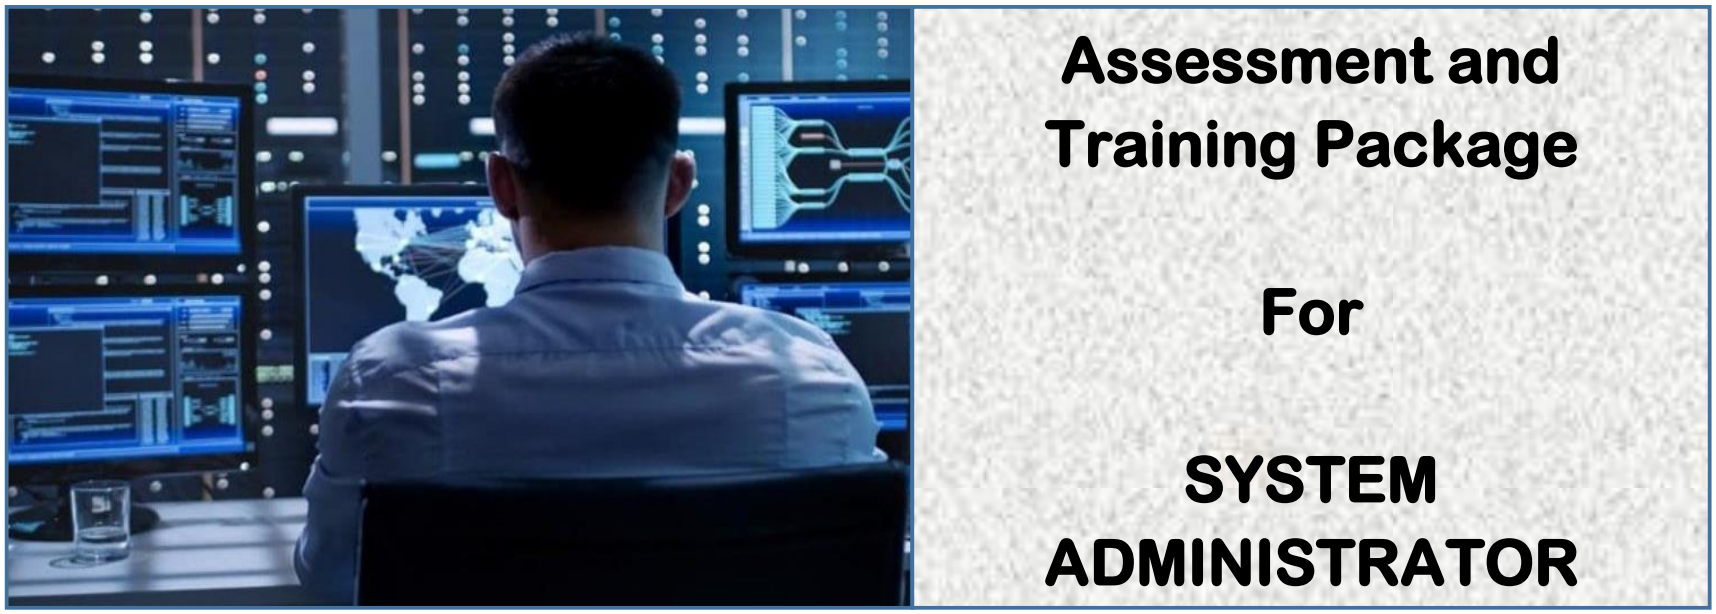 DIT-ASSESSMENT AND TRAINING PACKAGE FOR A SYSTEM ADMINISTRATOR